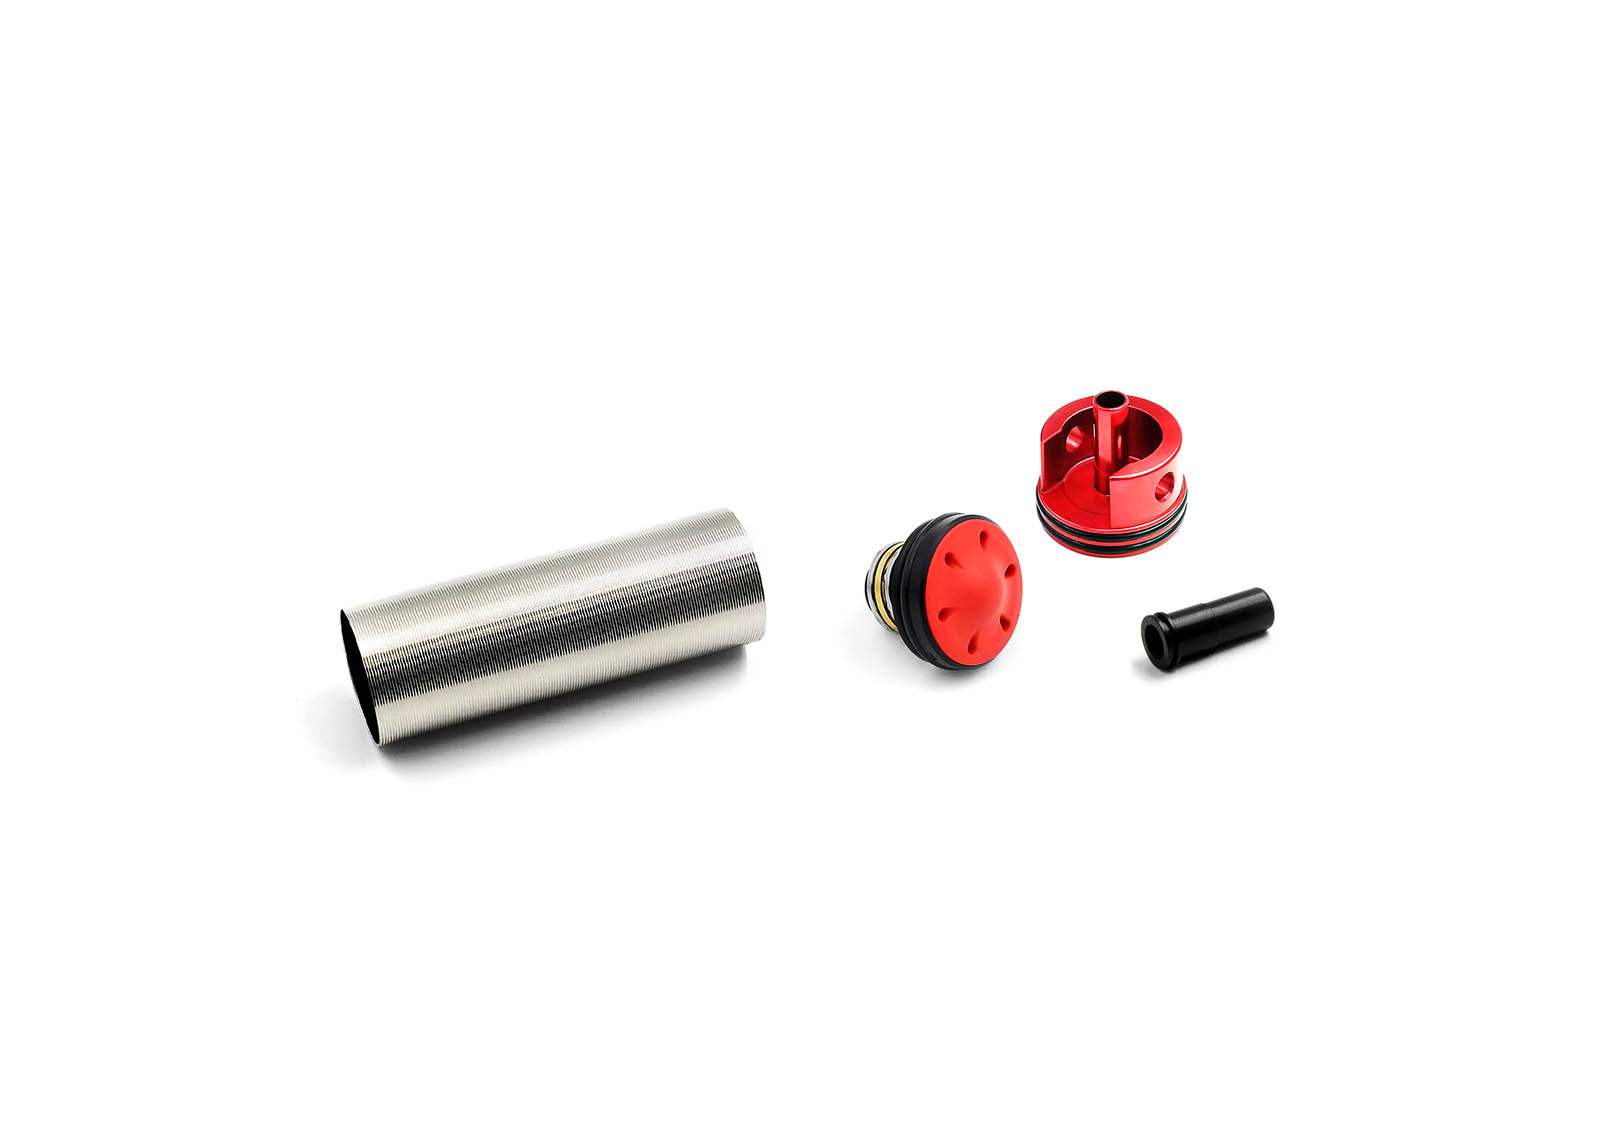 Bore-Up Cylinder Set for G3-A3/A4/SG1 - Modify AEG Airsoft parts